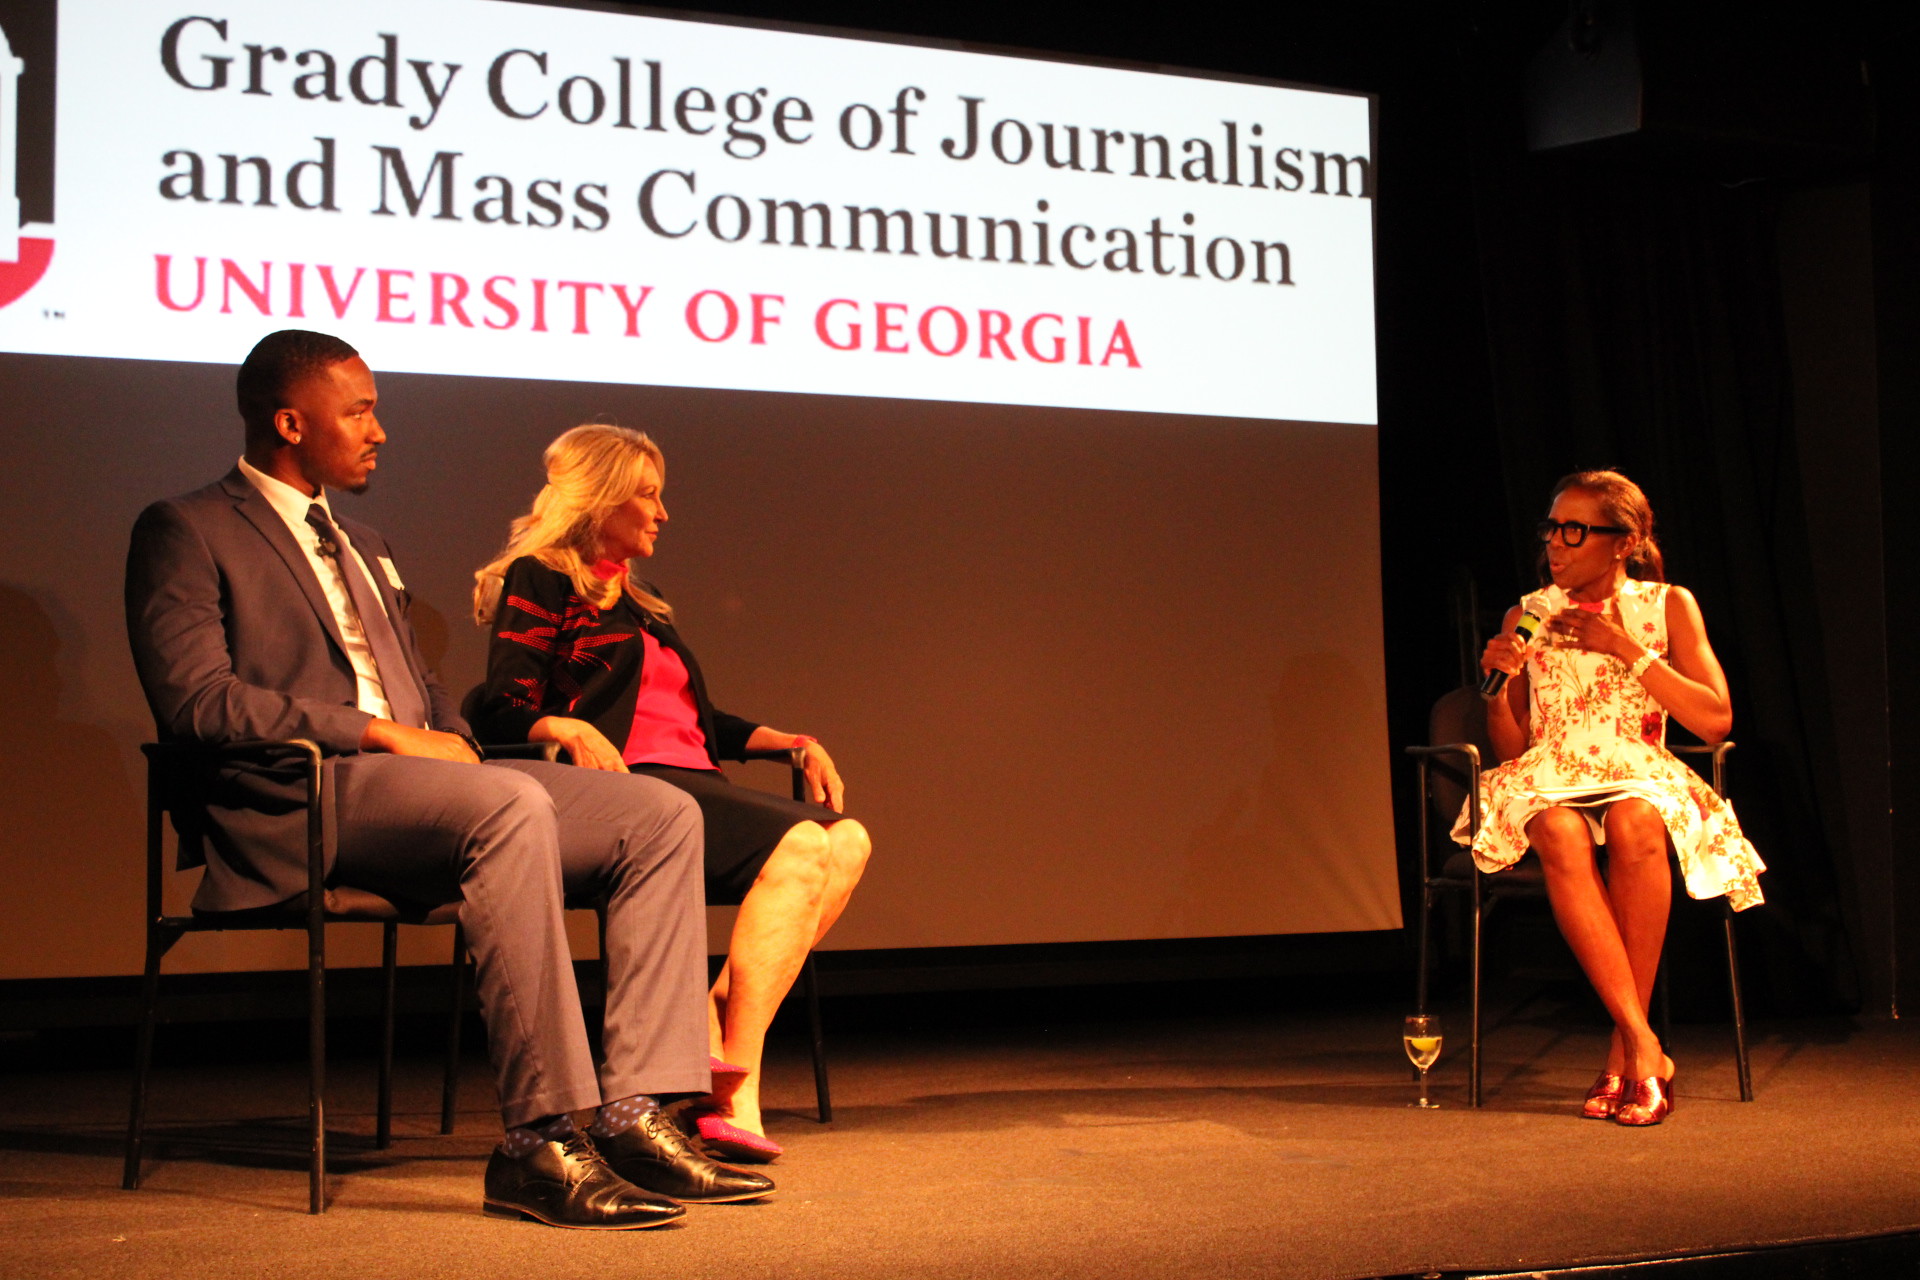 Grady alumni, current students, faculty and staff gathered in NYC for a screening of 